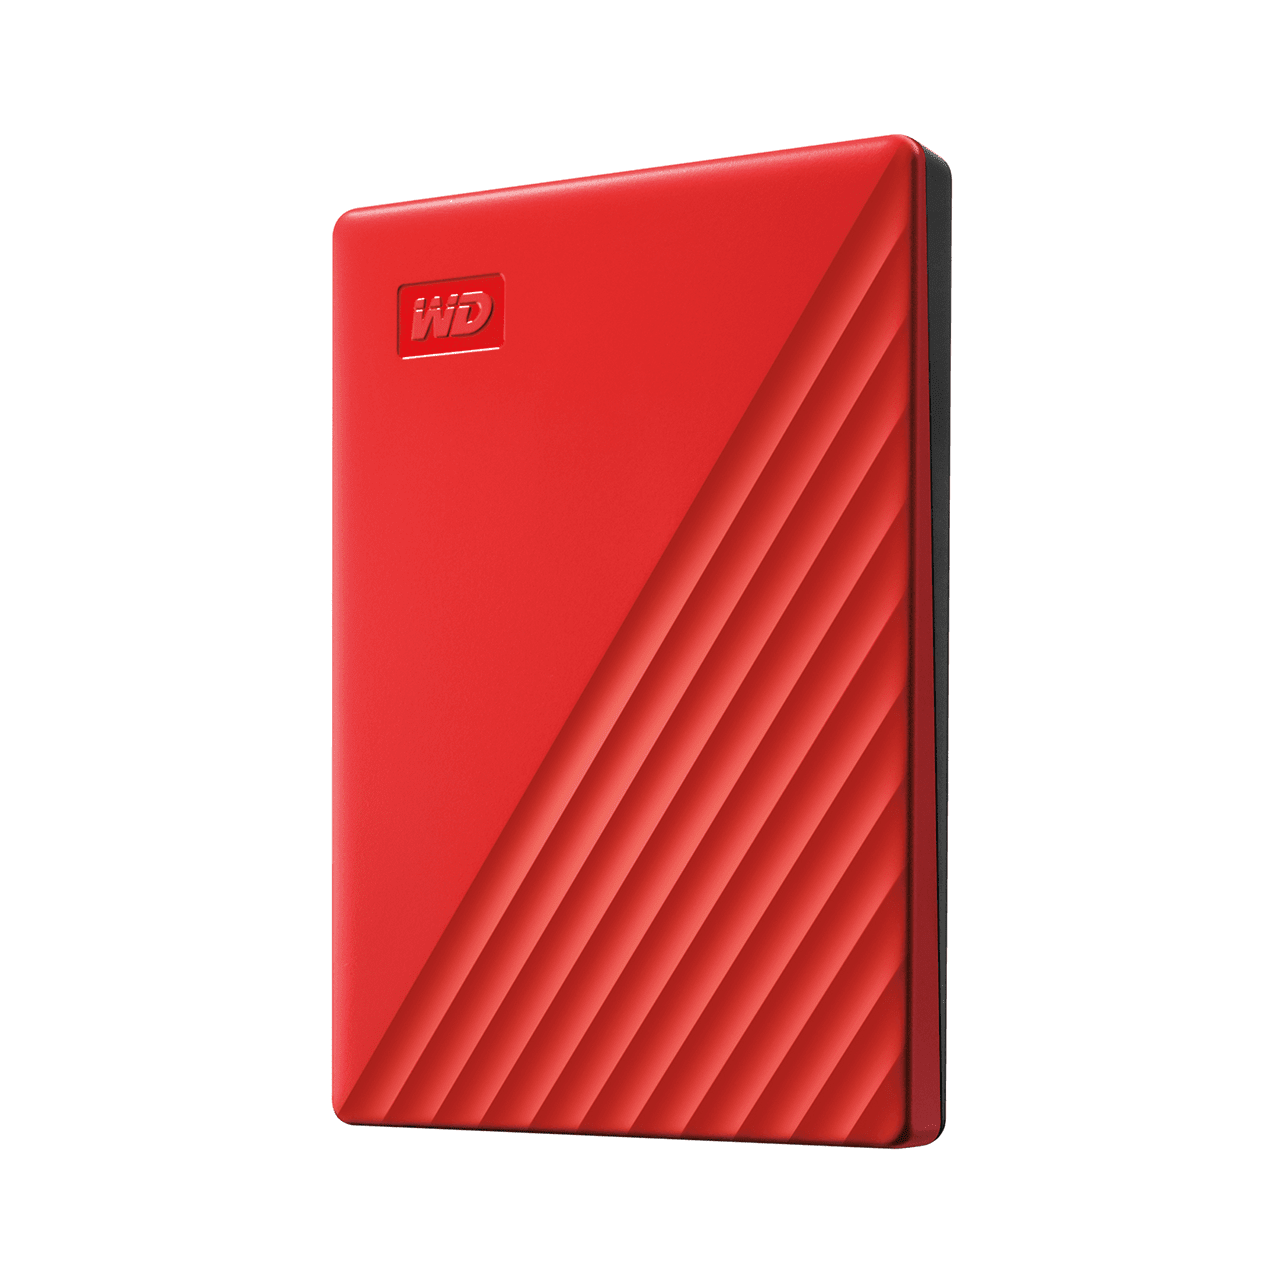 WD Western Digital My Passport  2TB ( RED ) Slim Portable External Hard Disk USB 3.0 With WD Backup Software & Password Protection